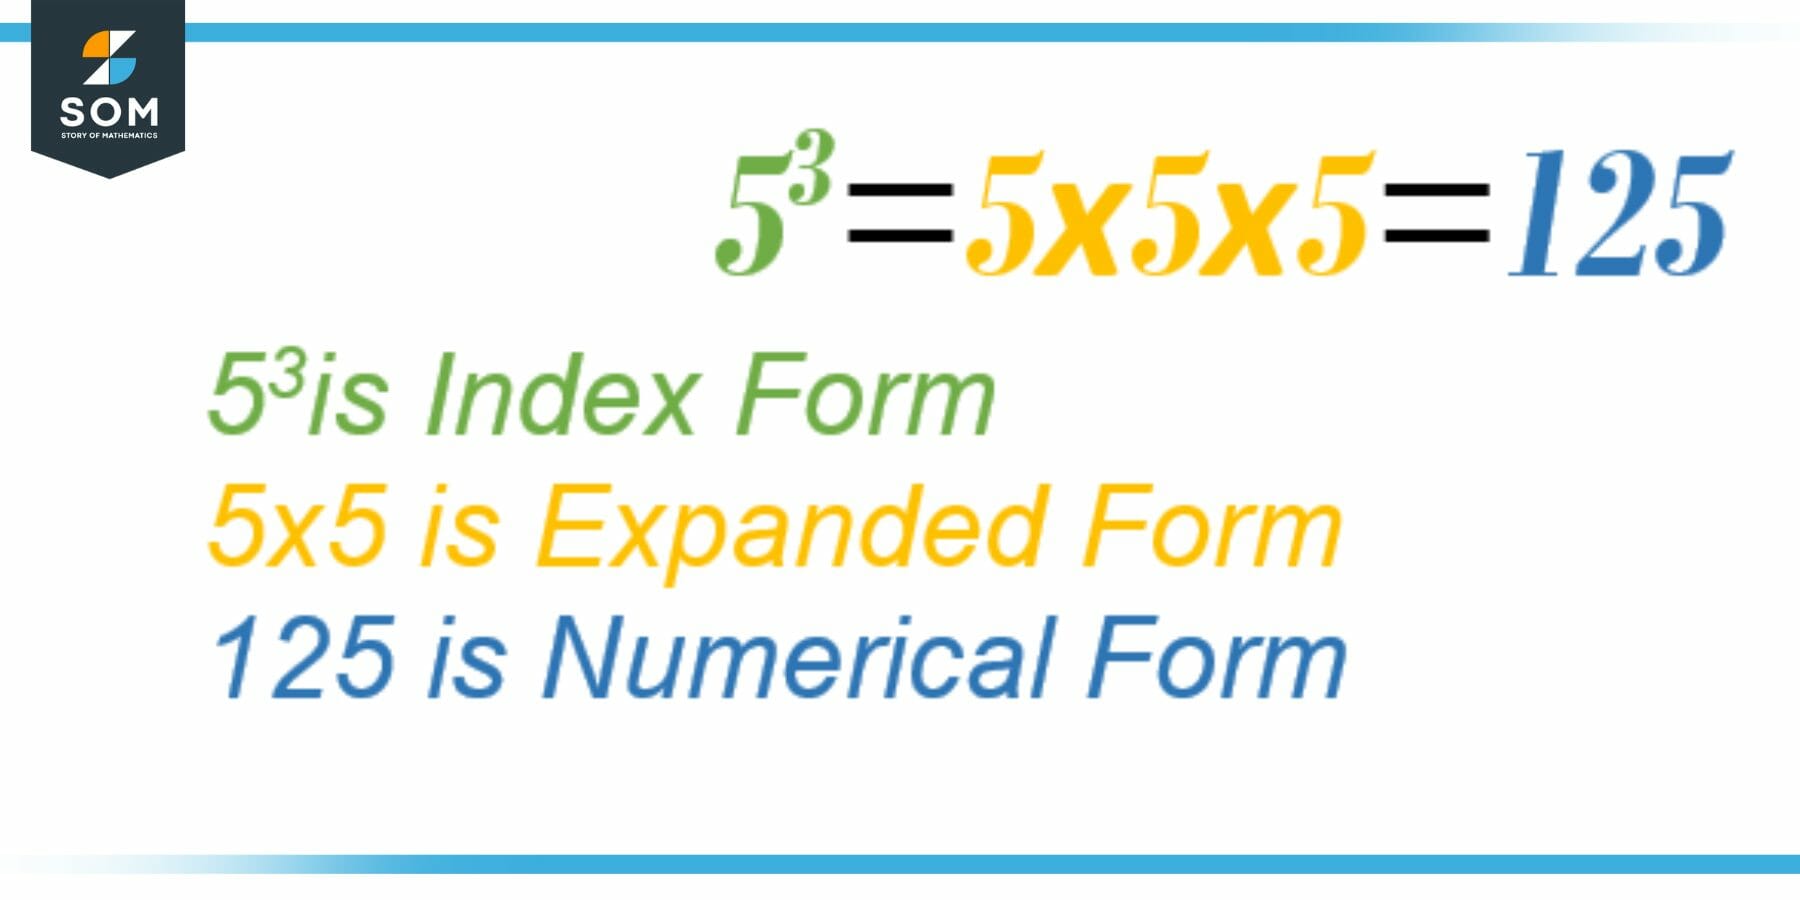 Index,Expanded, Numerical Form